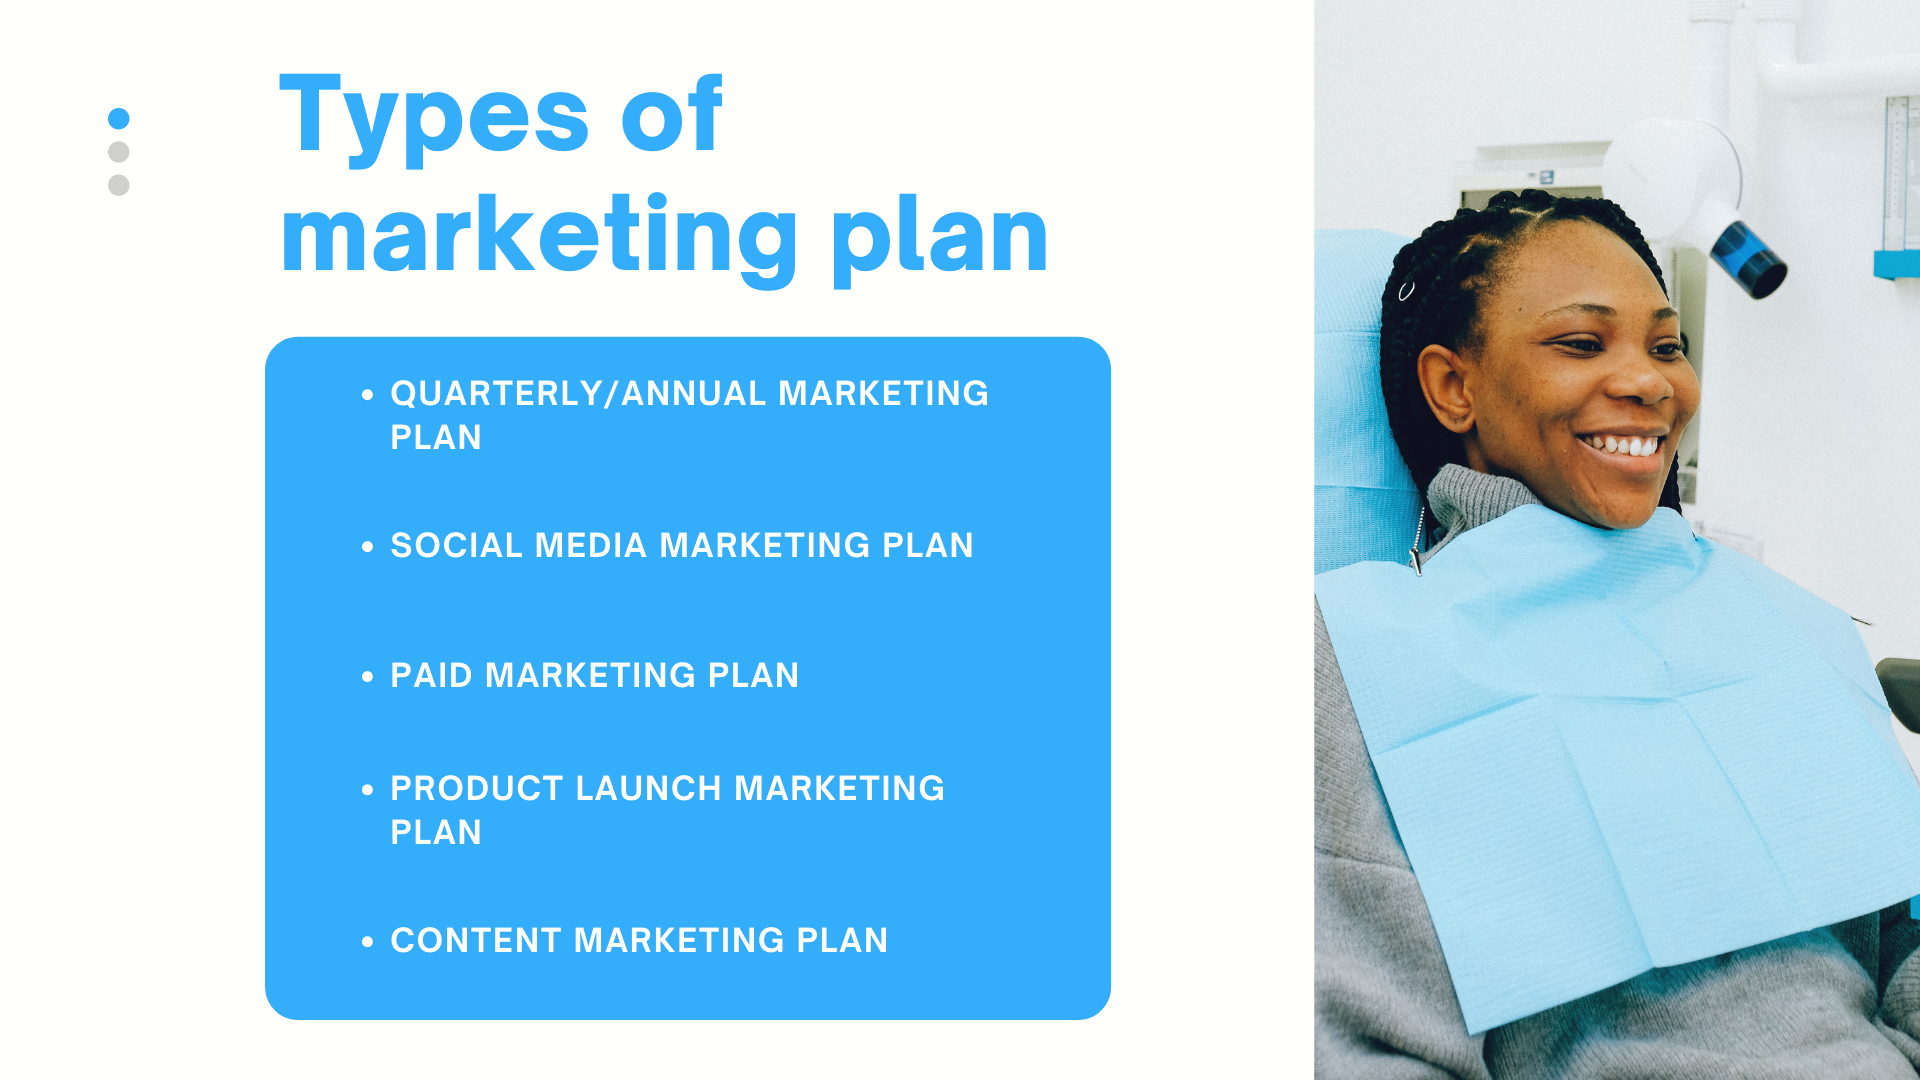 Different Types of marketing plan